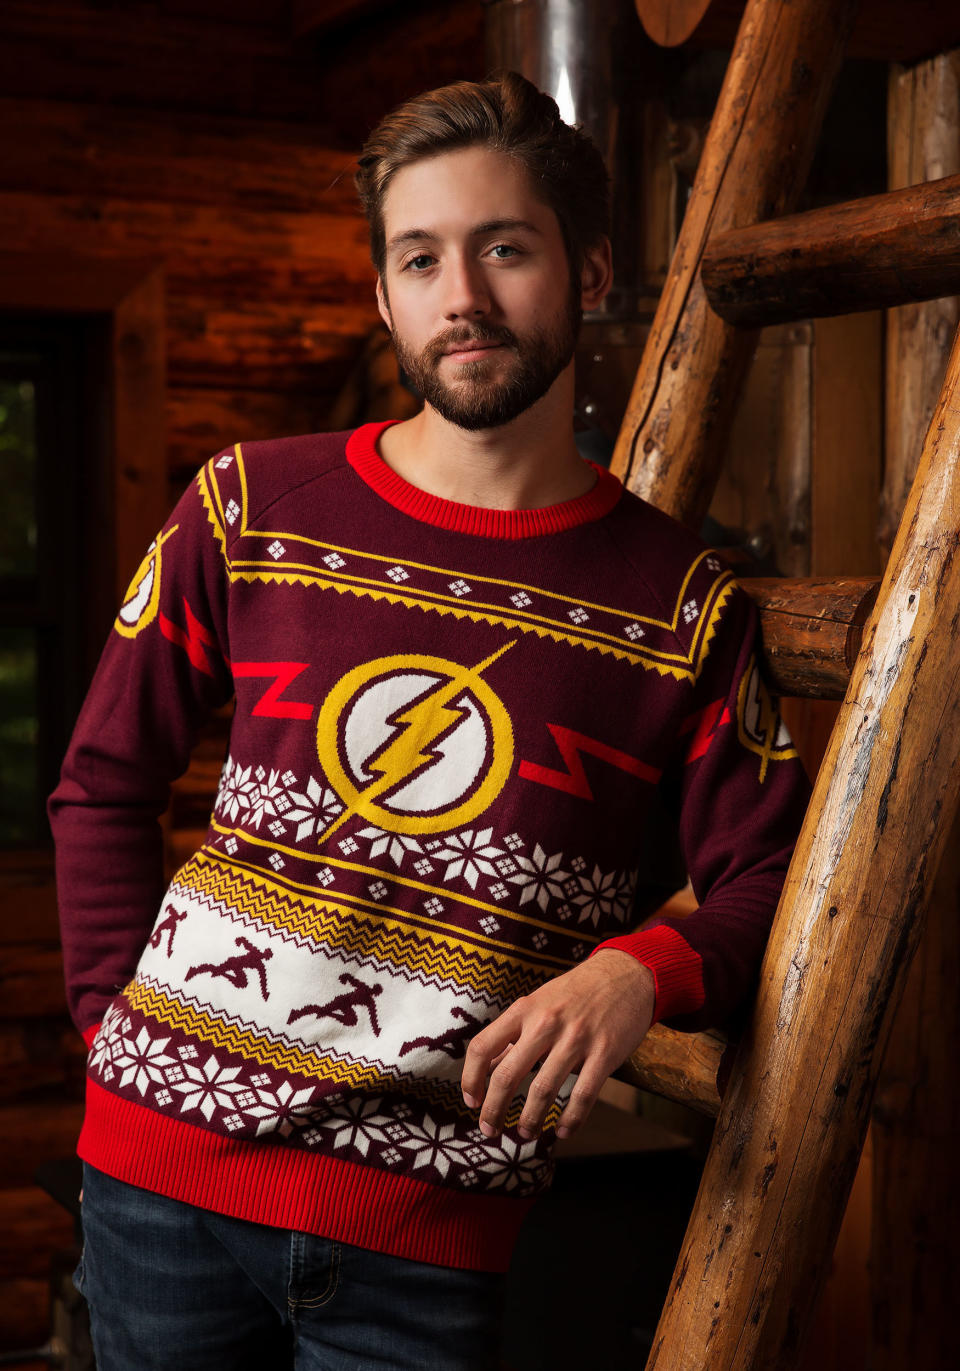 This sweater might seem cool today, but I suspect it's <a href="https://www.fun.com/adult-flash-logo-adult-holiday-sweater.html" target="_blank">a Flash in the pan.</a>